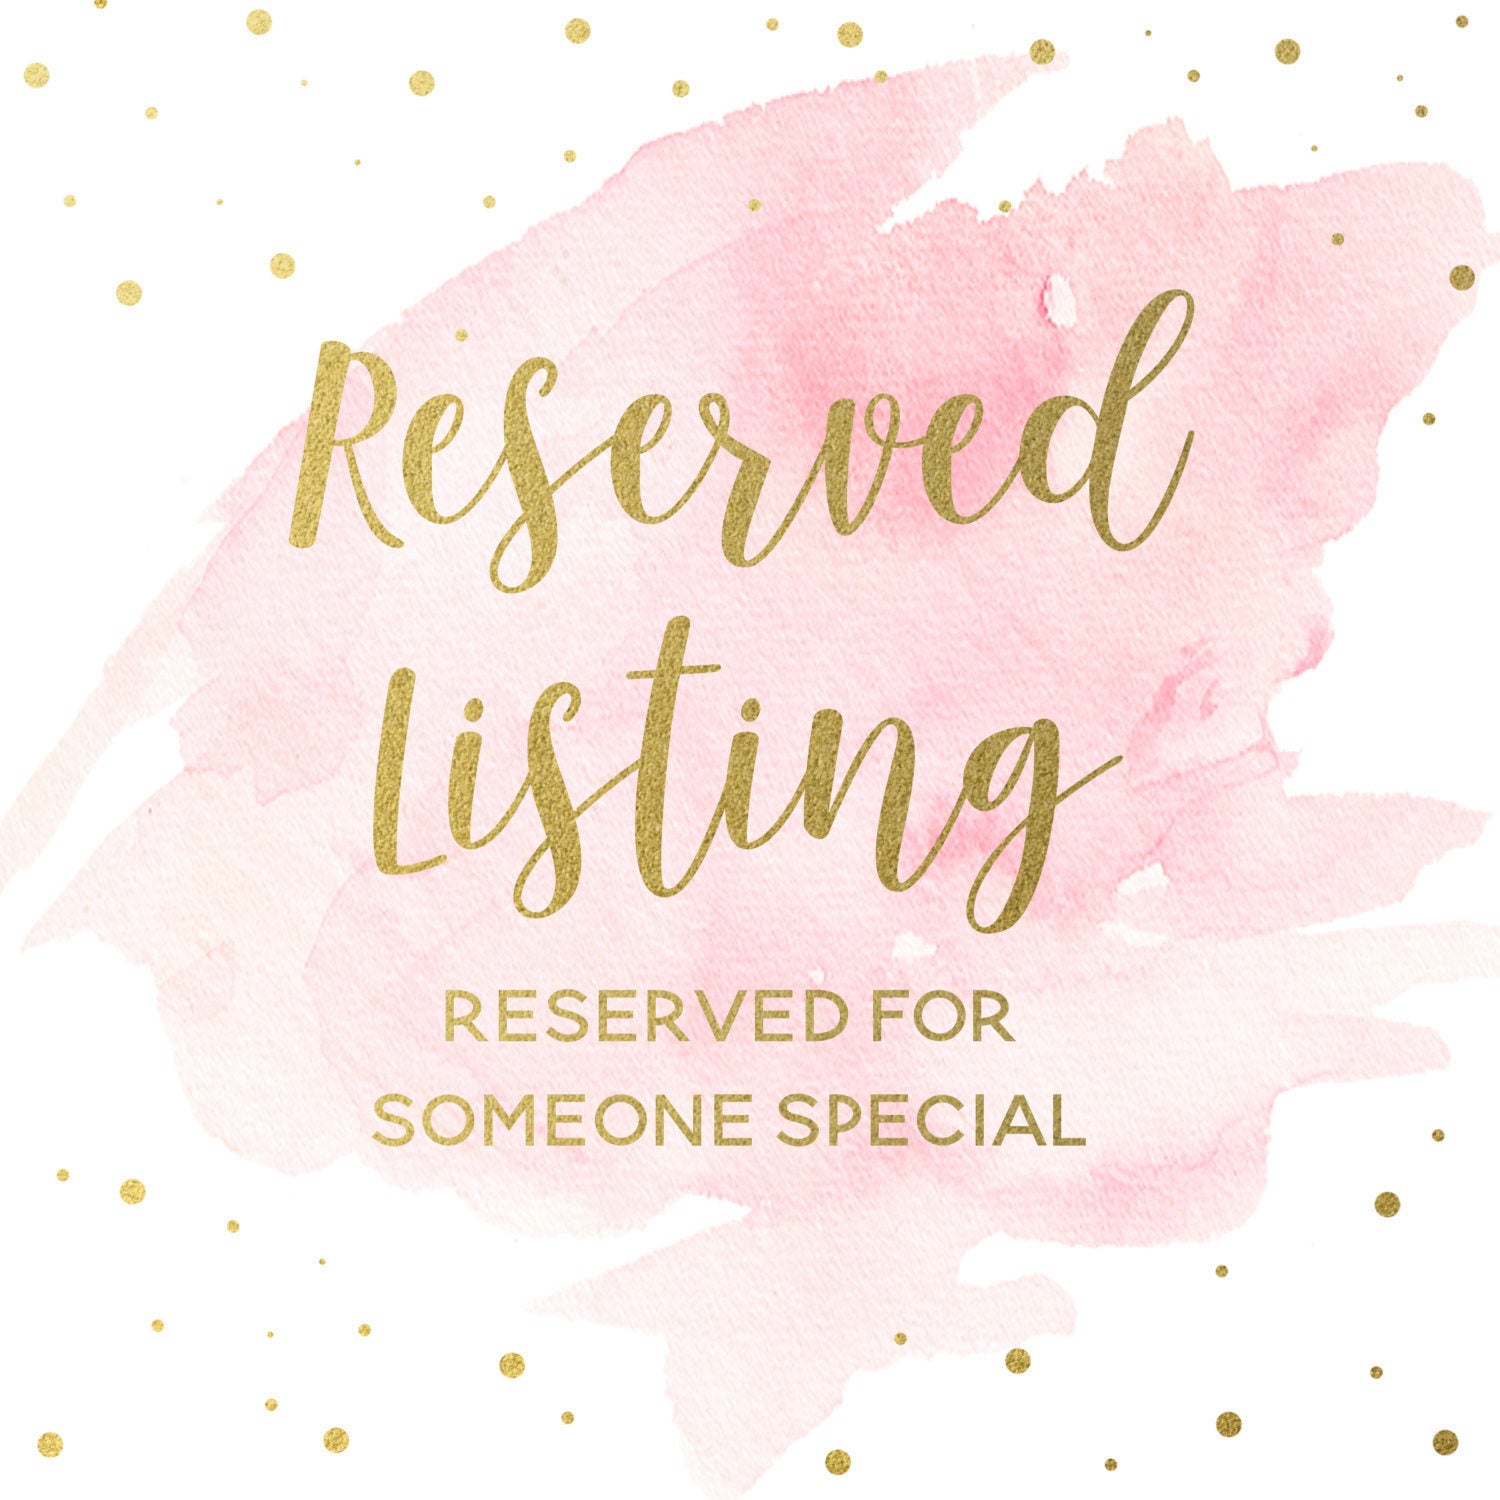 Reserved Listing - Carrie G.